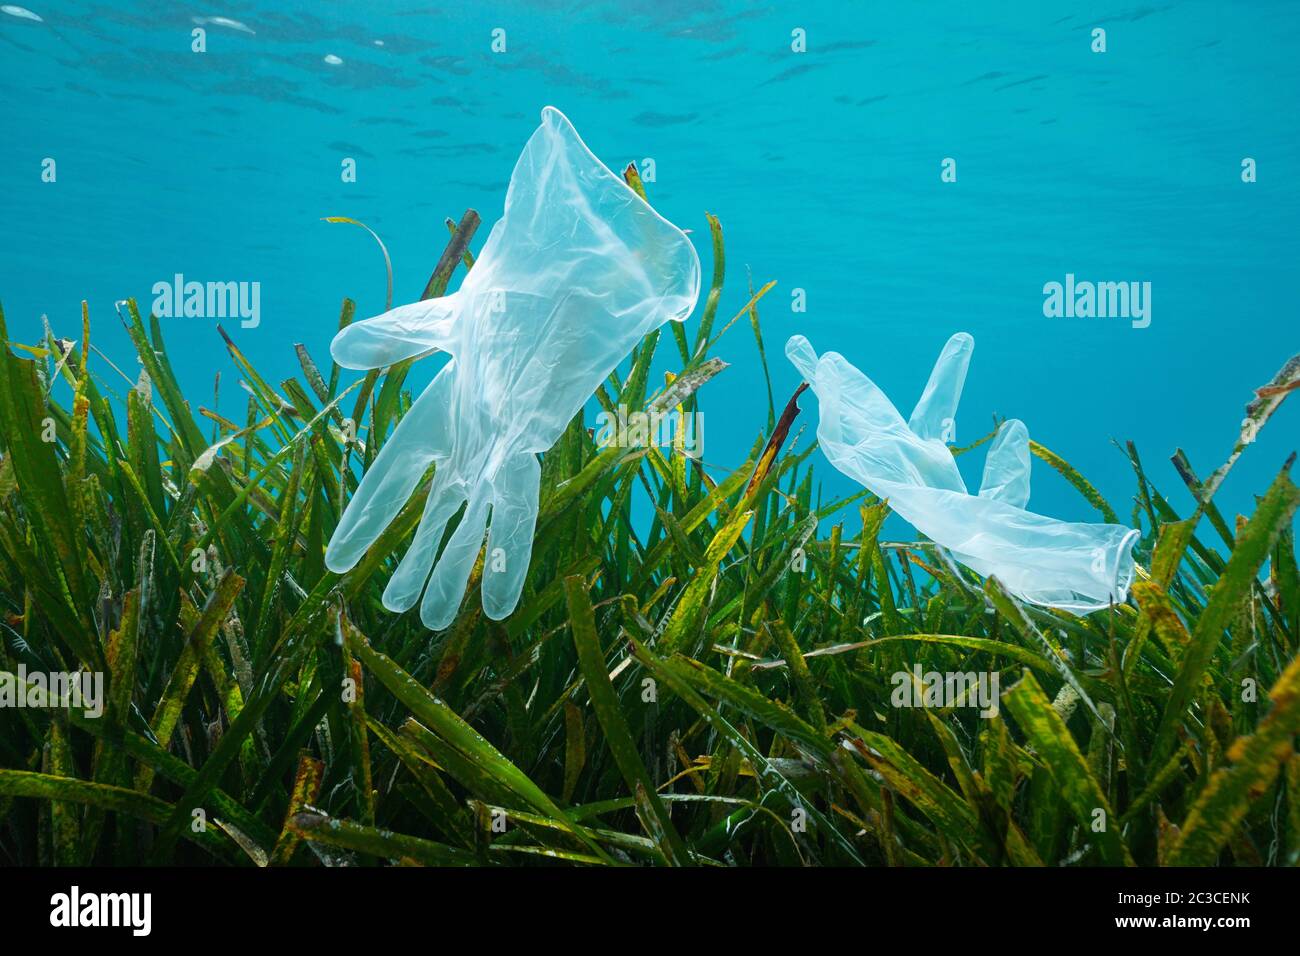 Plastic waste in the sea, disposable gloves with seagrass Posidonia oceanica underwater, Mediterranean sea, France Stock Photo